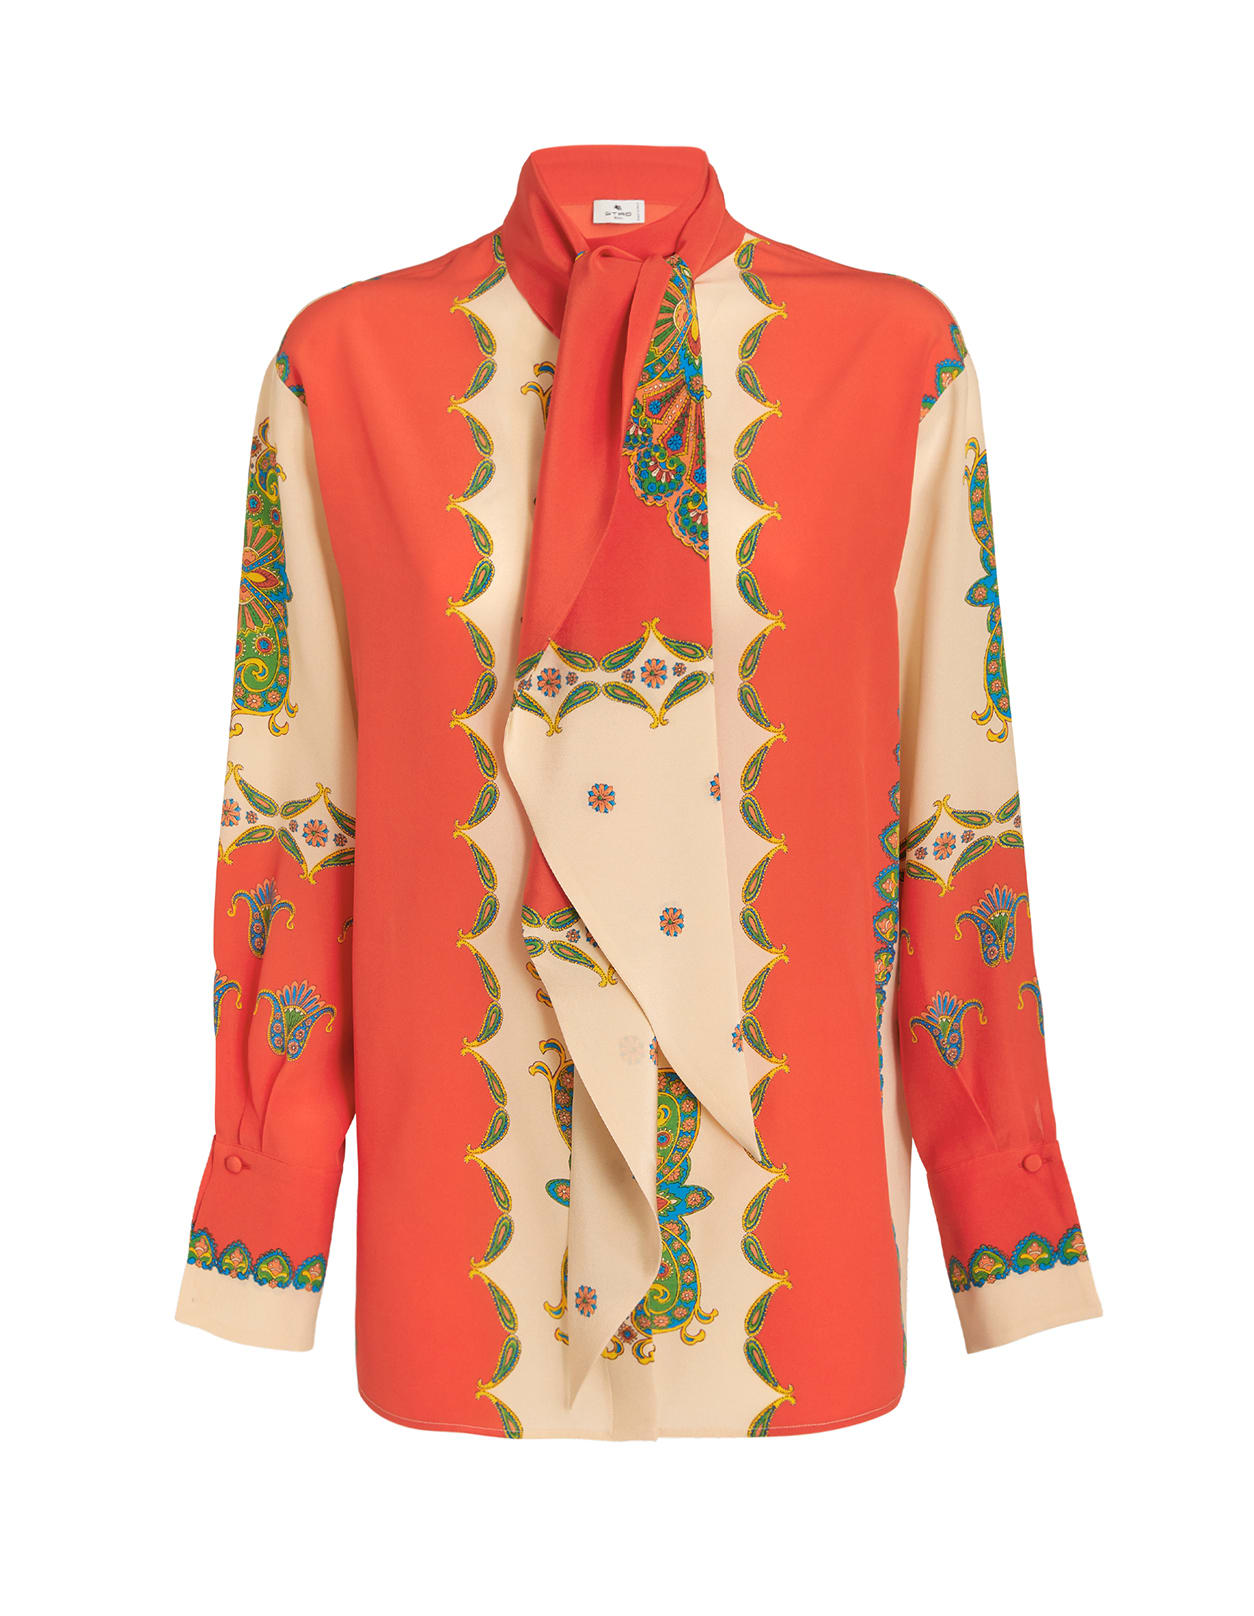 ETRO WOMAN SHIRT IN PAISLEY SILK WITH LAVALLIERE COLLAR